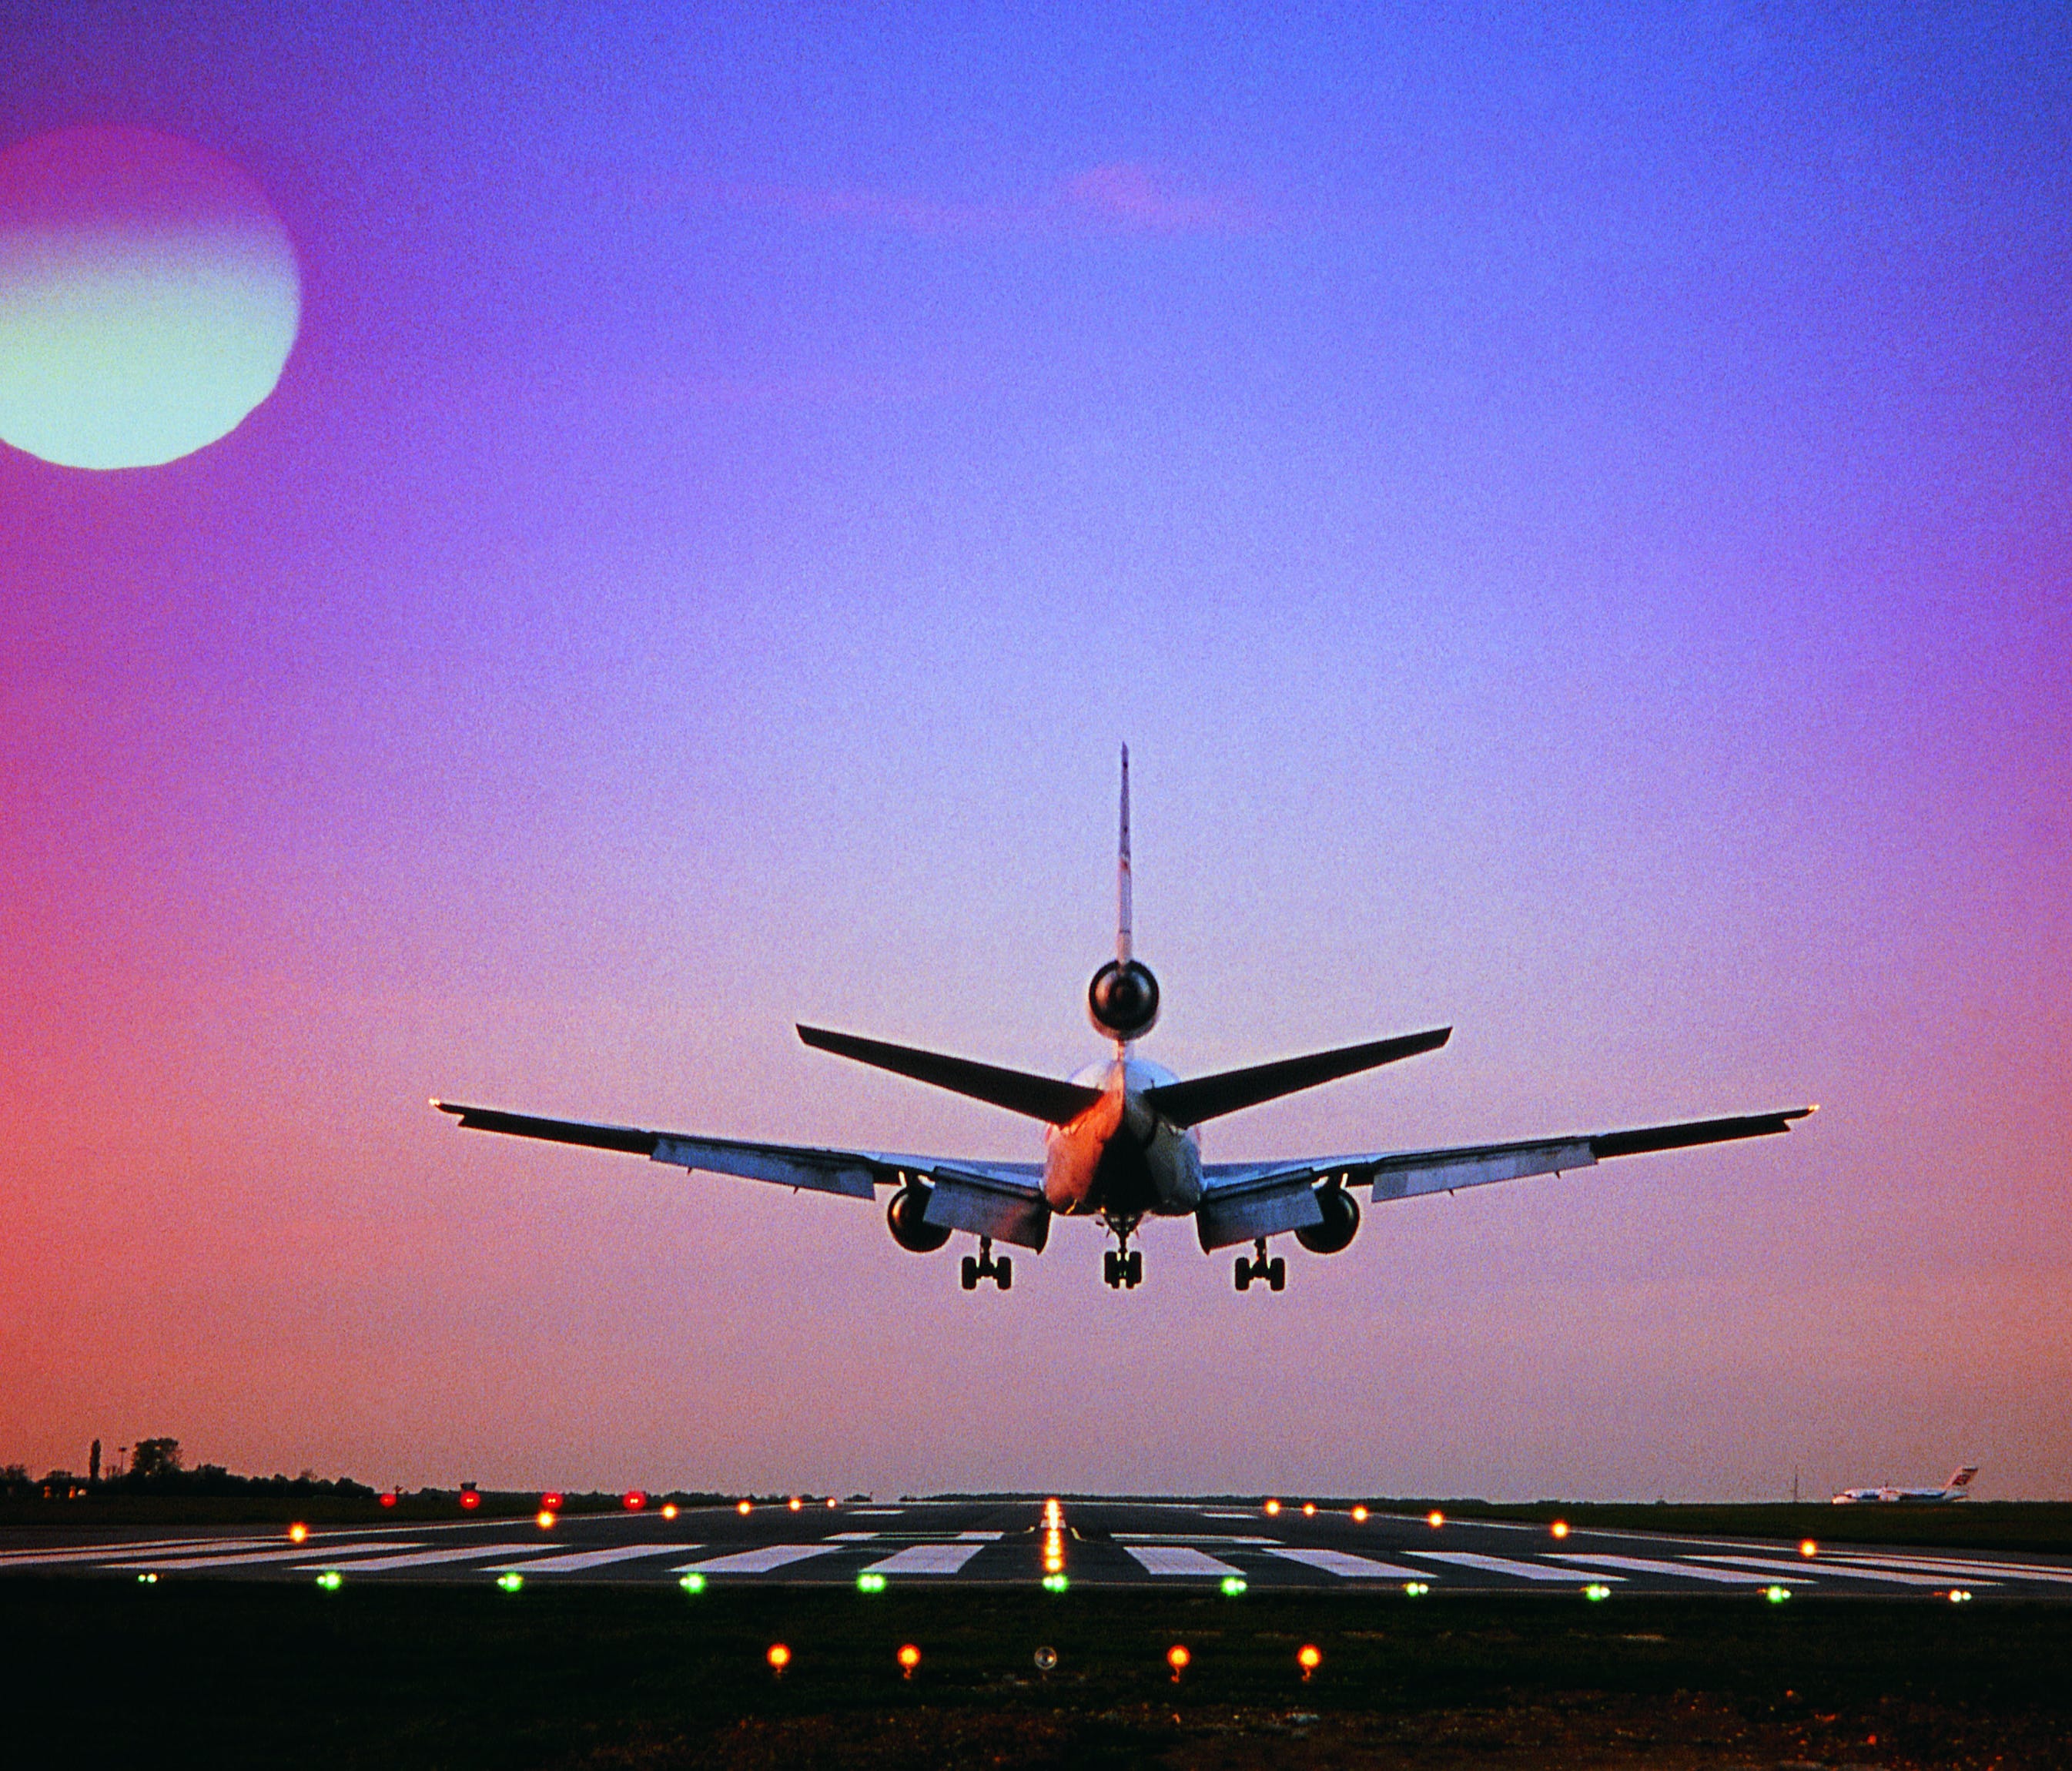 A smooth landing is a combination of many factors, with pilot skill foremost among them.